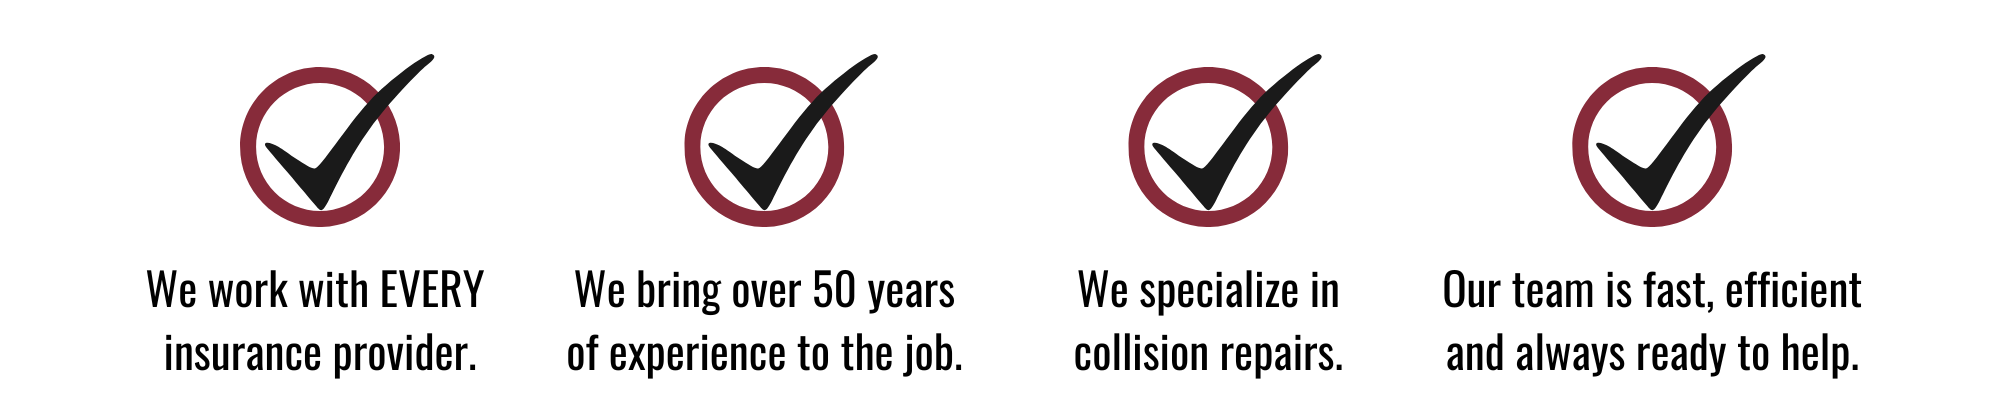 50 years of collision repair experience